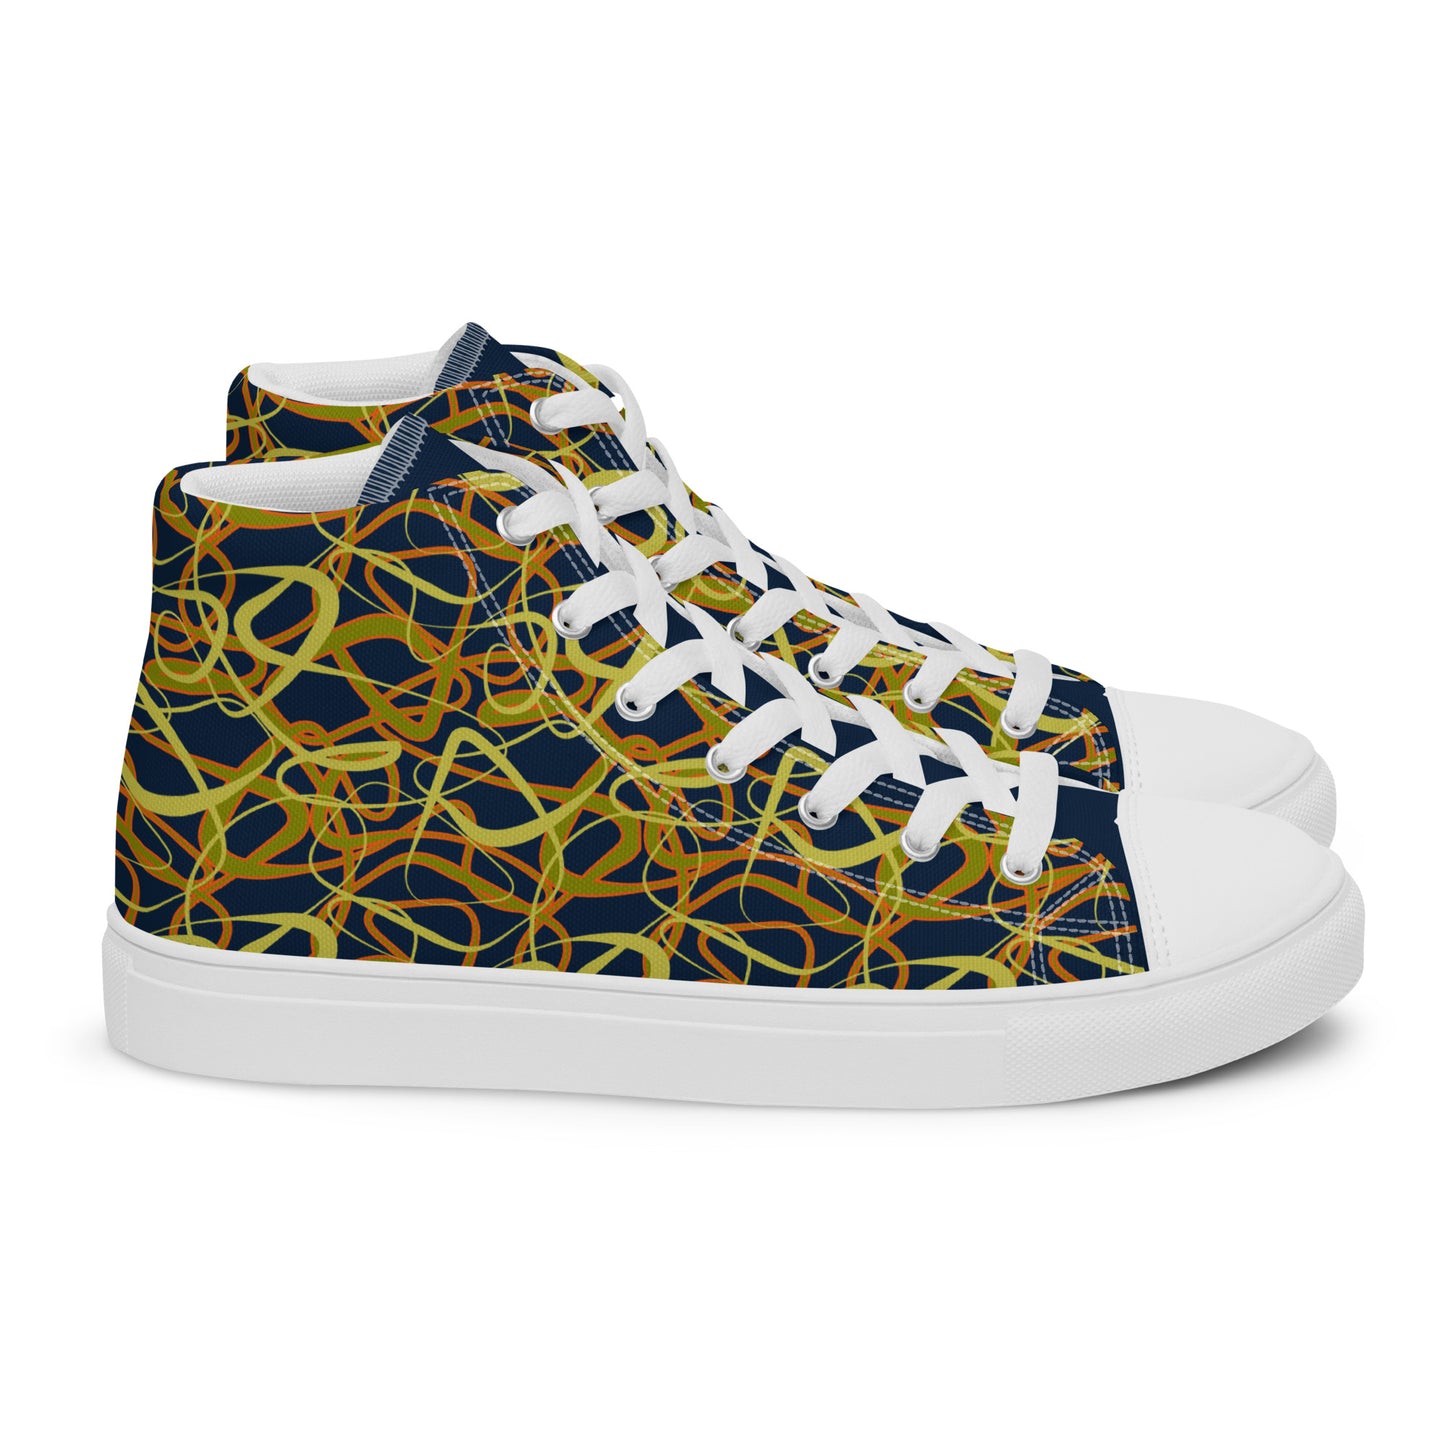 VOLTAGE | Men’s high top canvas shoes | LIMITED EDITION